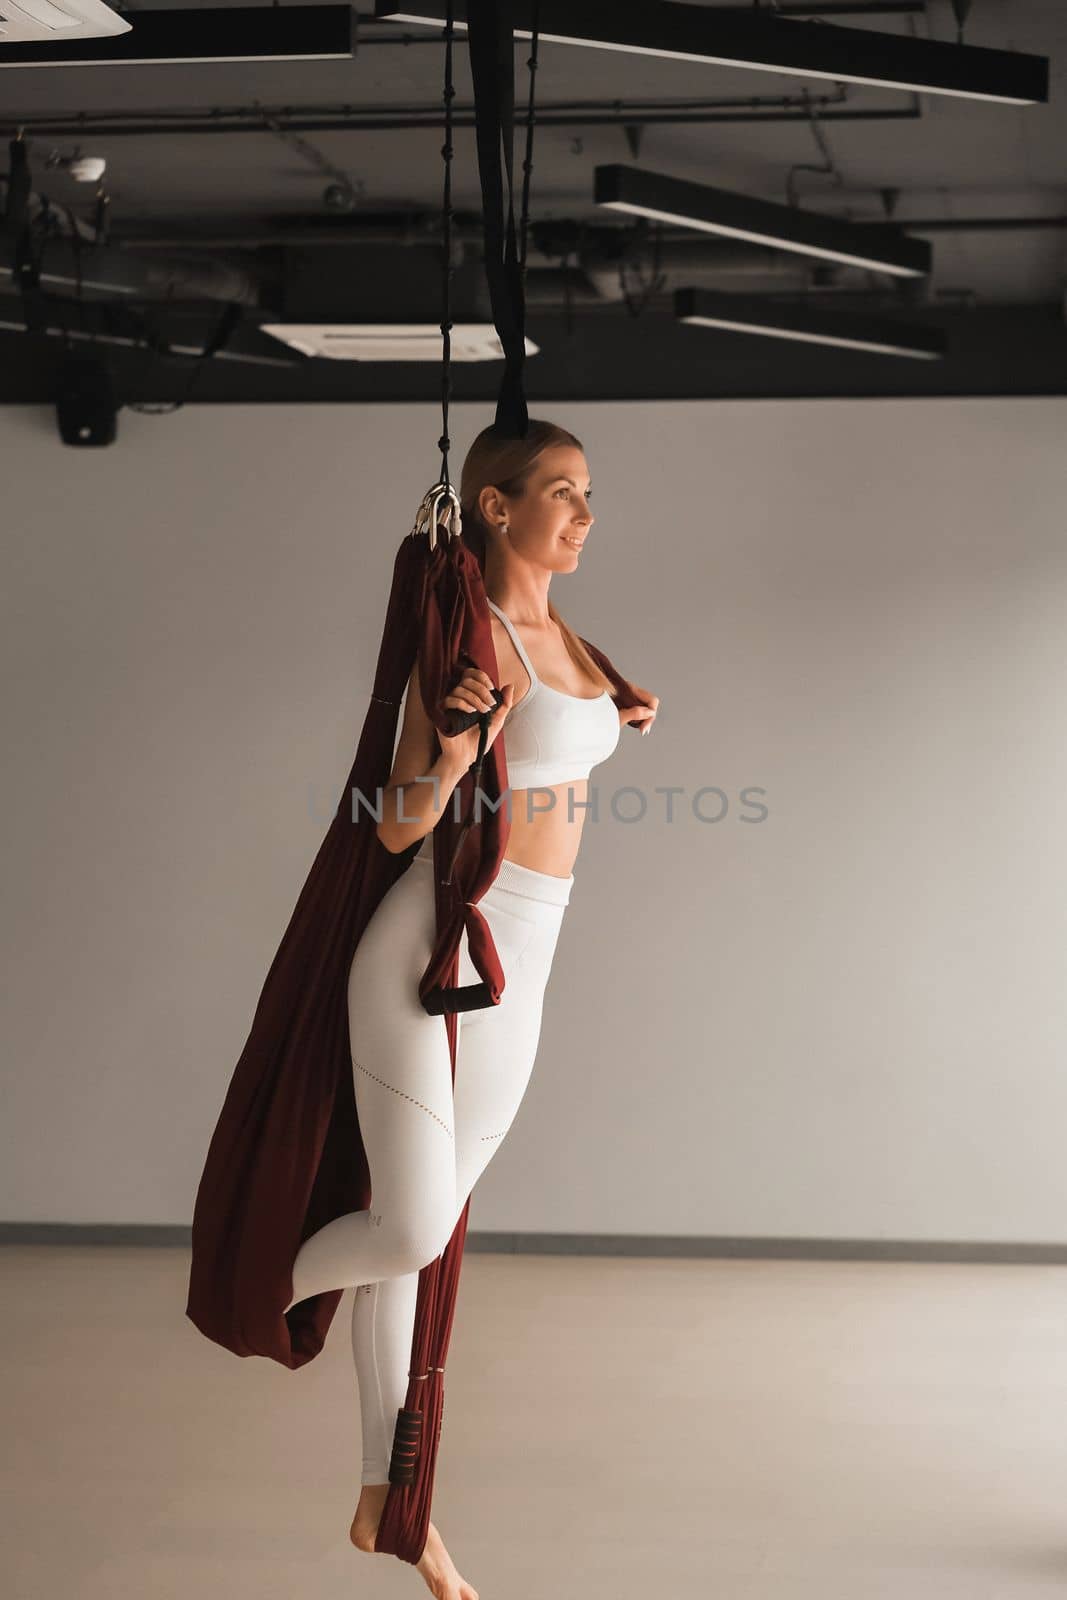 A girl in white sportswear does yoga on a hanging hammock in the fitness room by Lobachad